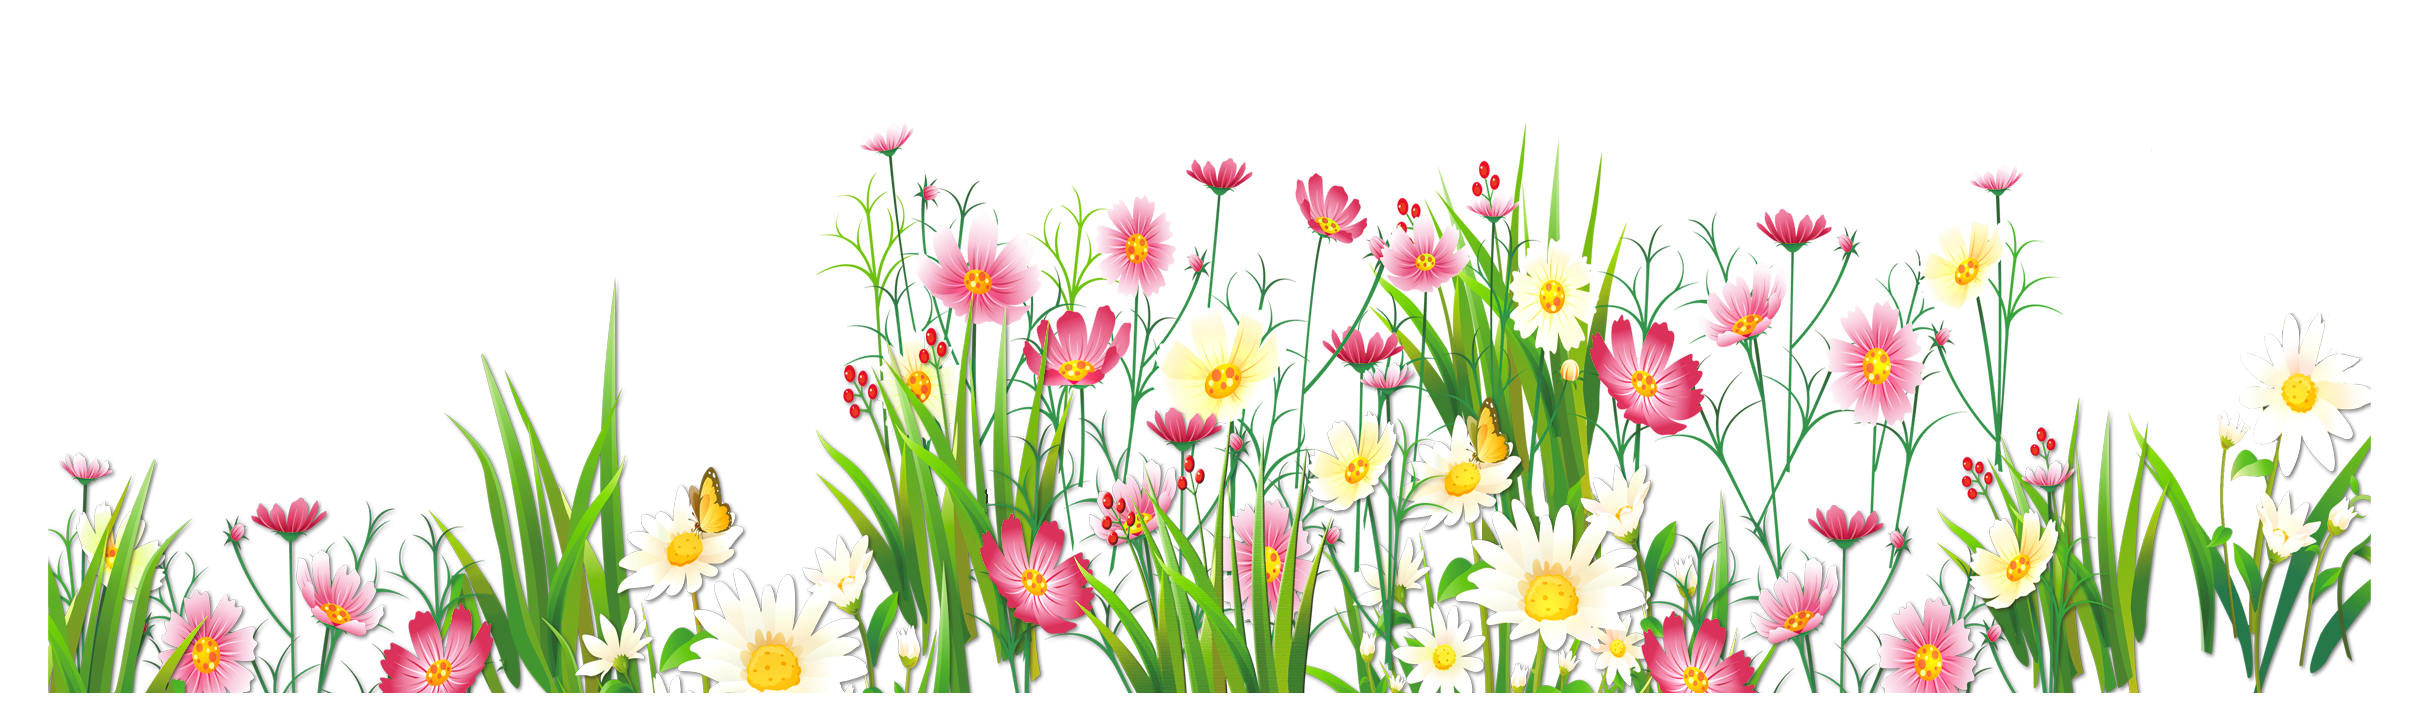 Flowers and Grass PNG Picture Clipart.